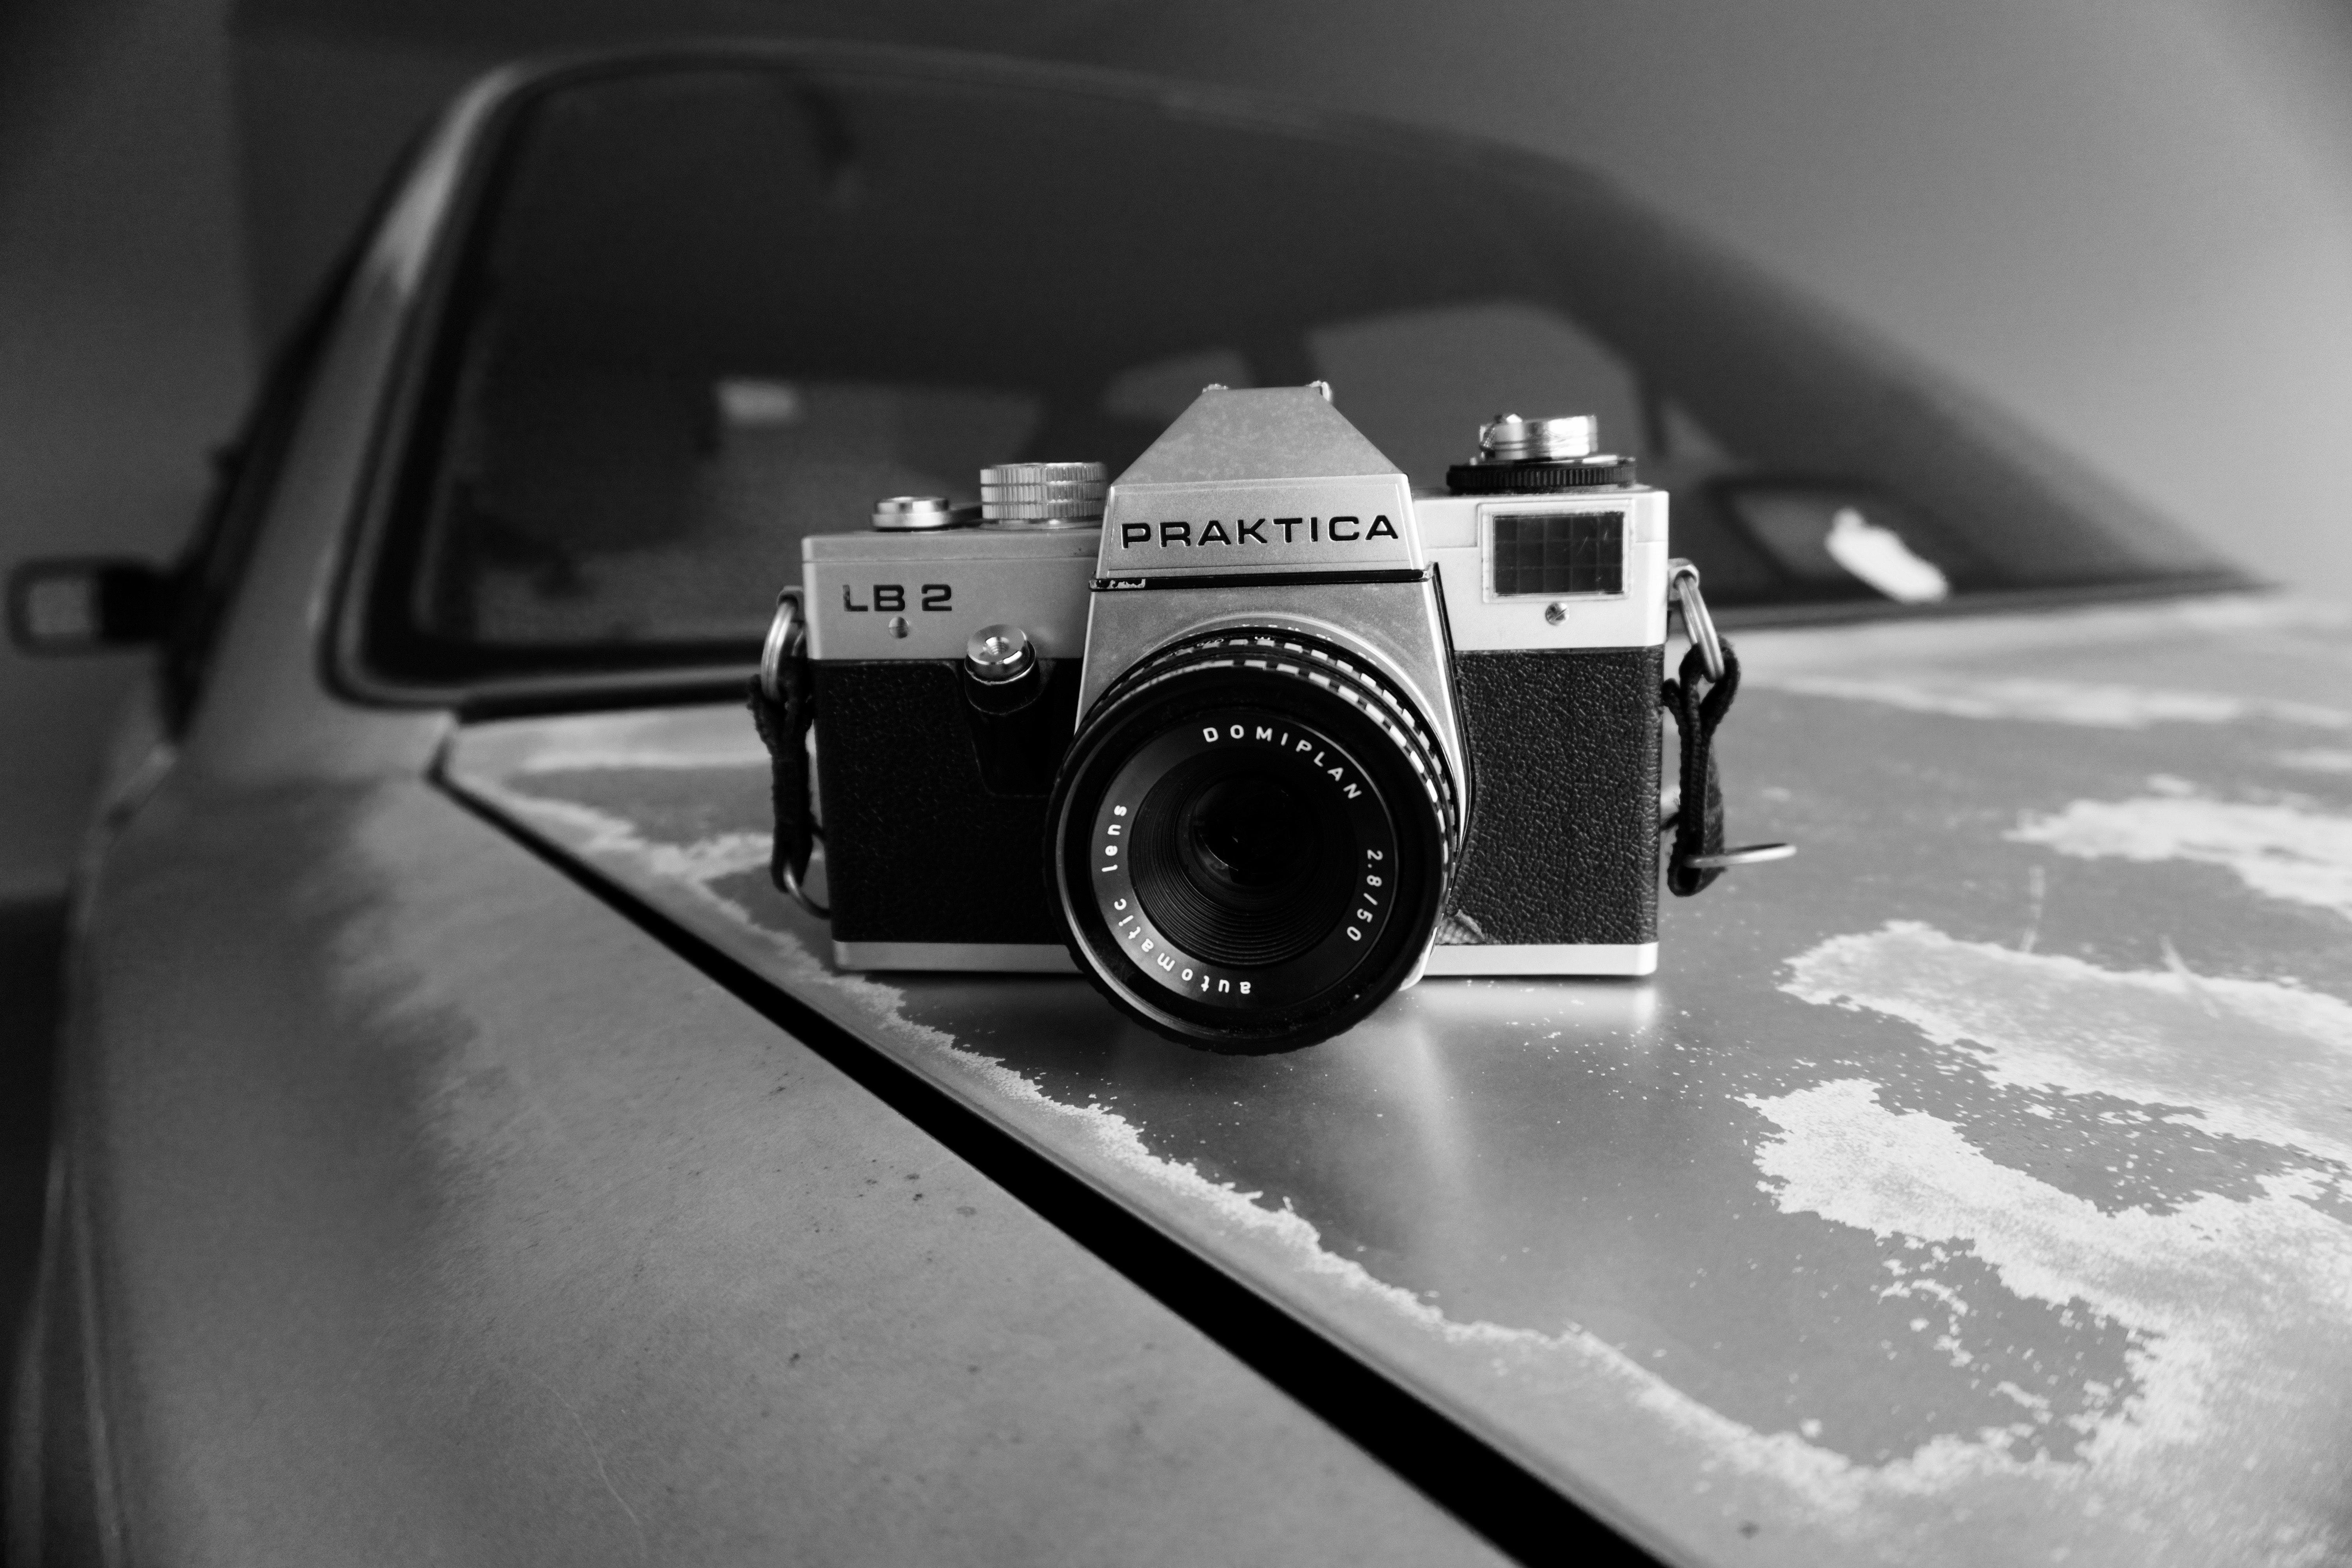 Gray Scale Photography of Silver and Black Praktica Dslr Camera, Analog, Photograph, Vintage, Vehicle, HQ Photo